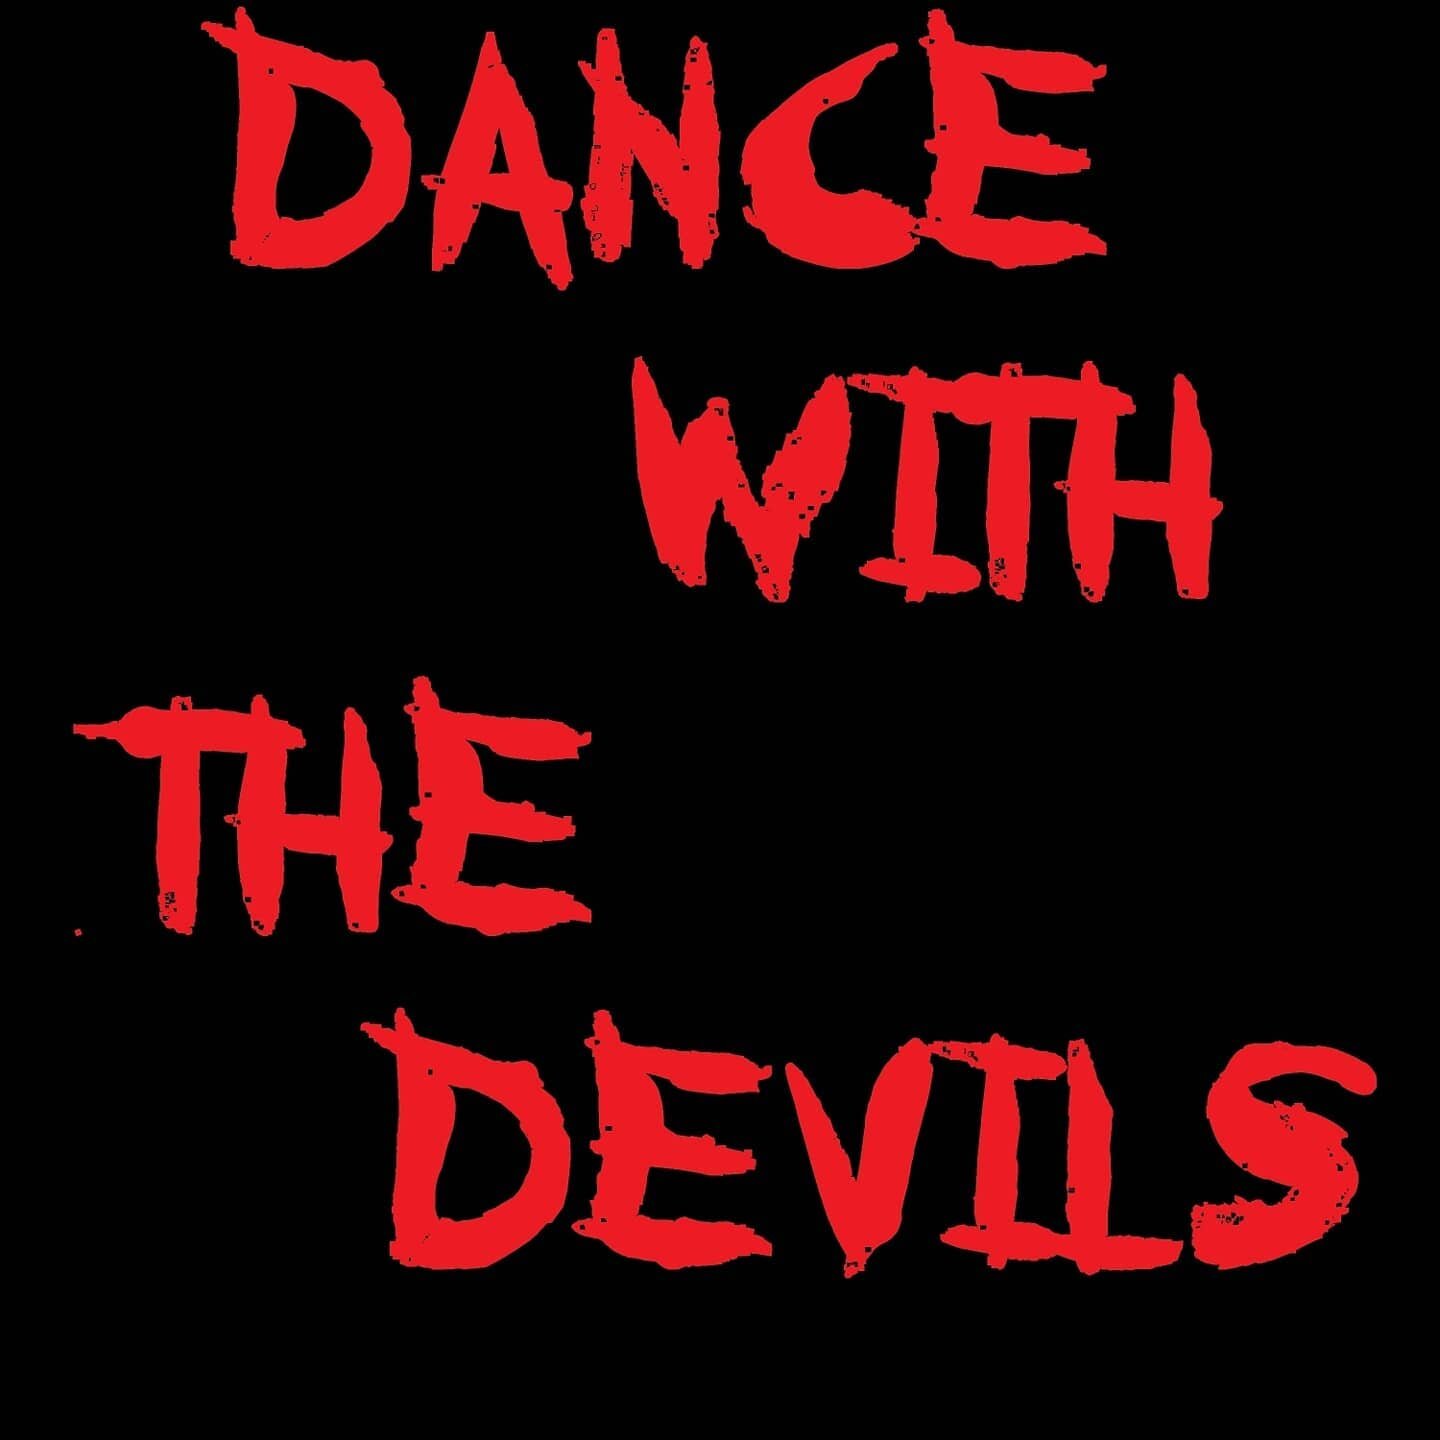 https://ditto.fm/dance-with-the-devils
1st Dec!!!!